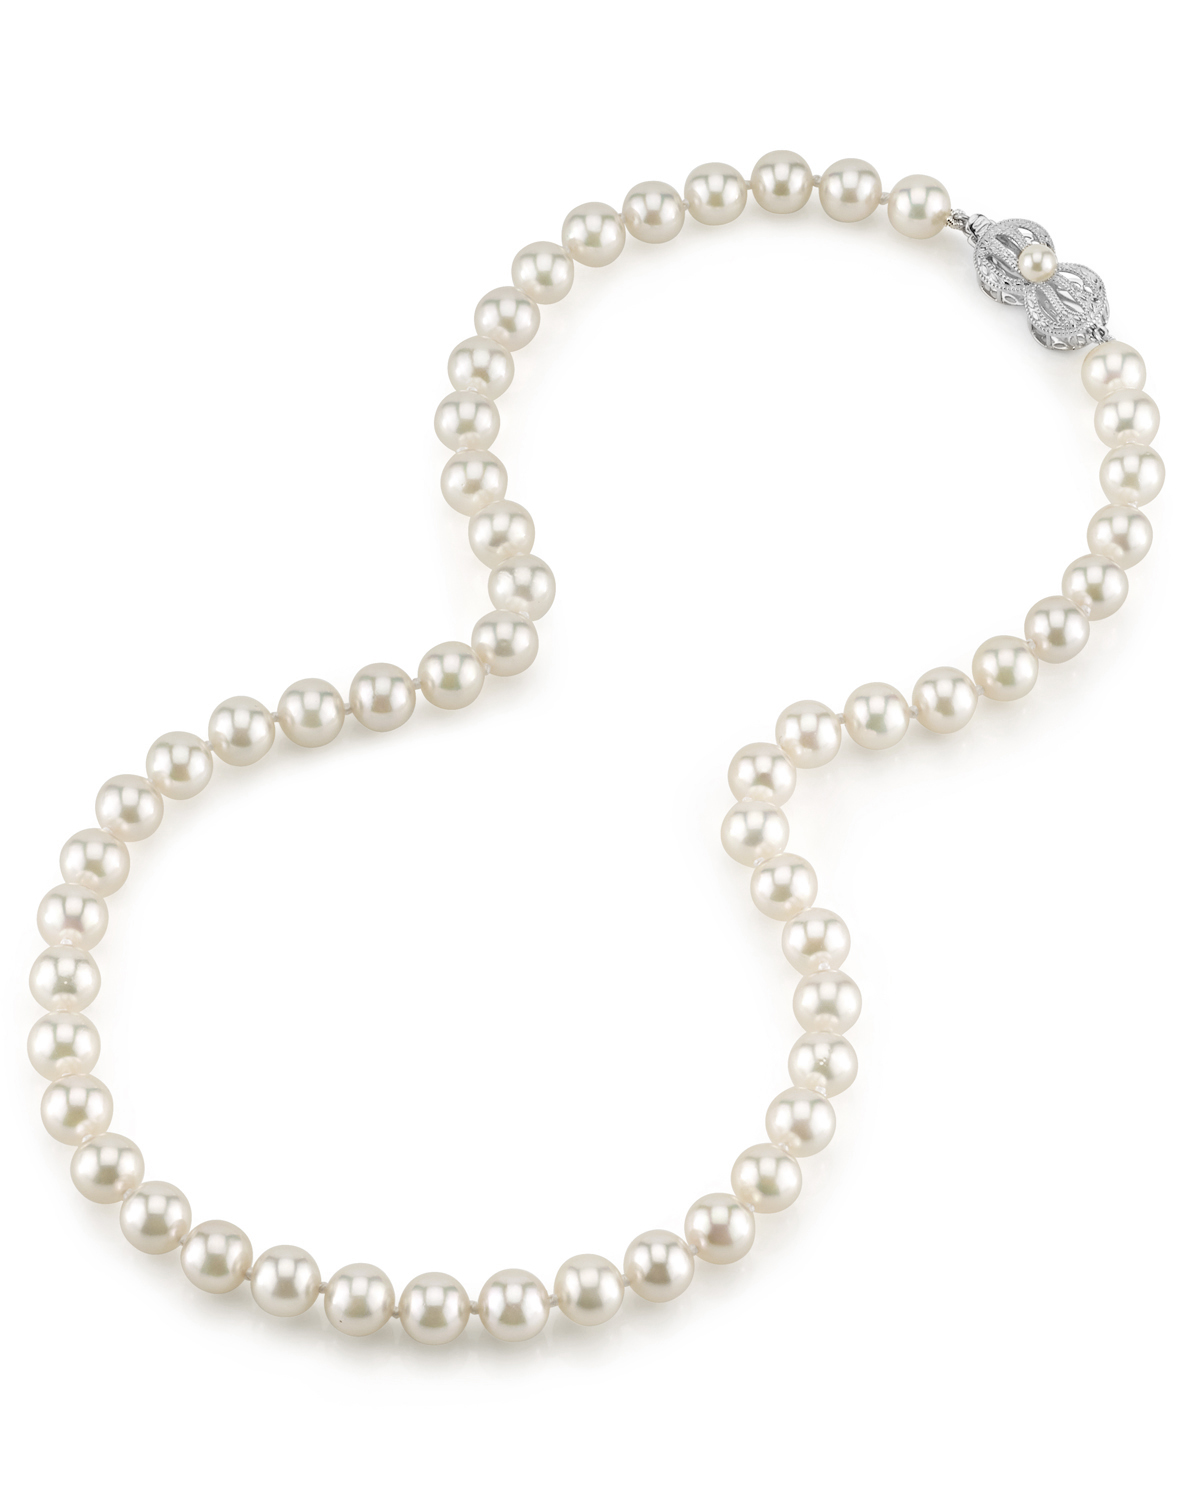 3 Rows AAAA Akoya white pearl necklace 18" bracelet 7.5-8"14K gold p Clasp